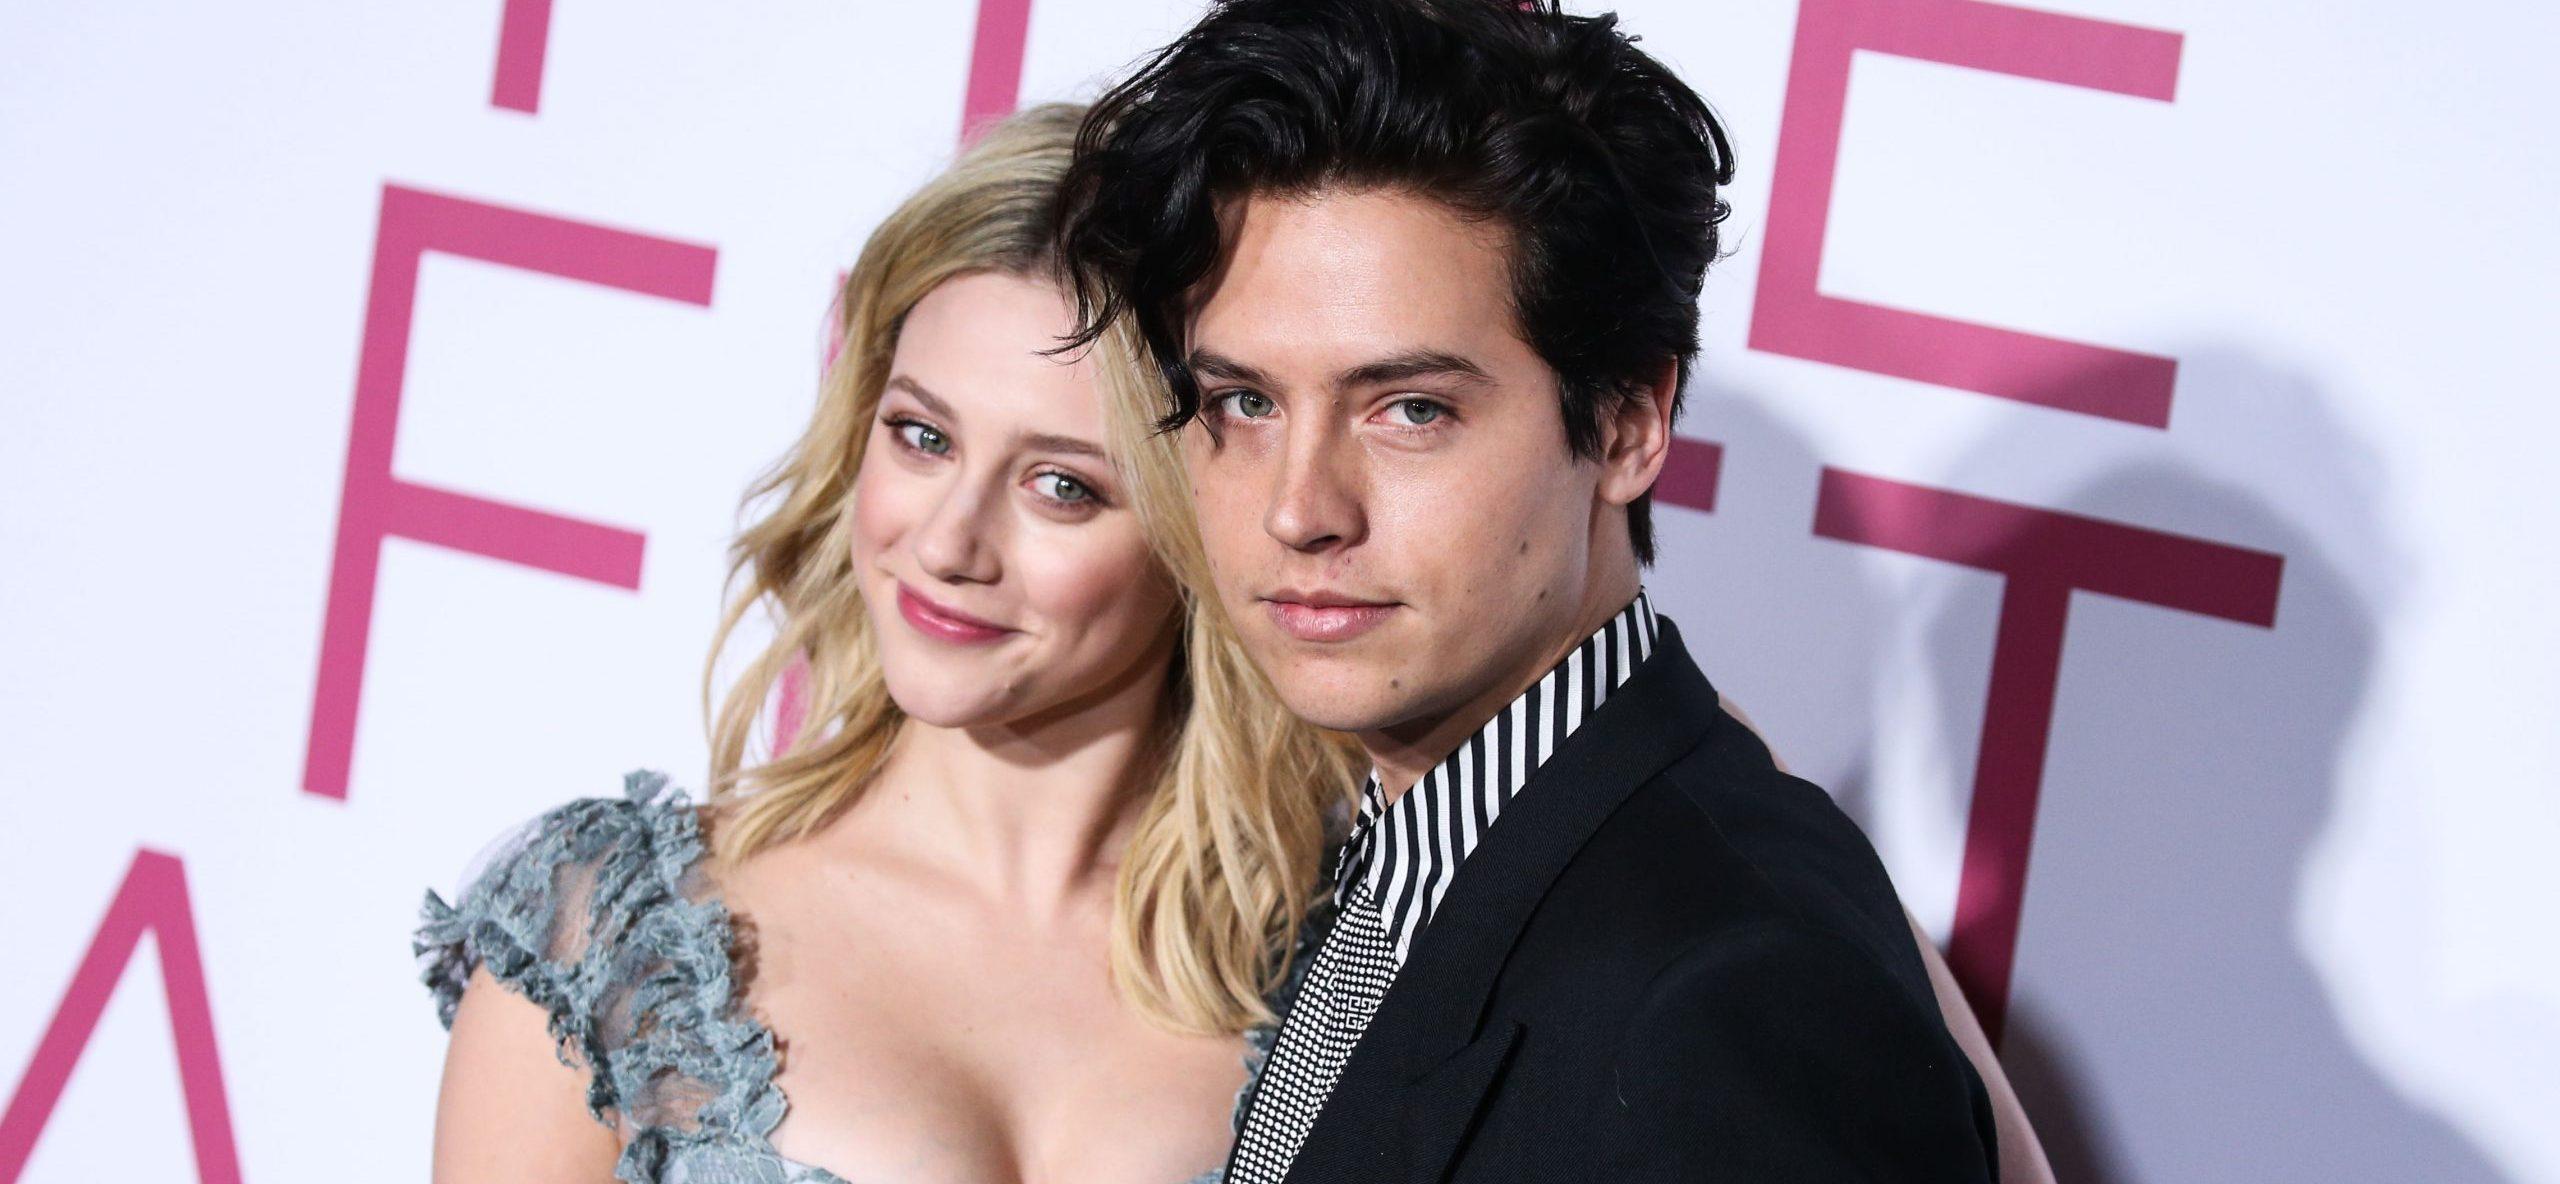 Cole Sprouse and Lili Reinhart Break Up Again Less Than a Year After Reconciliation